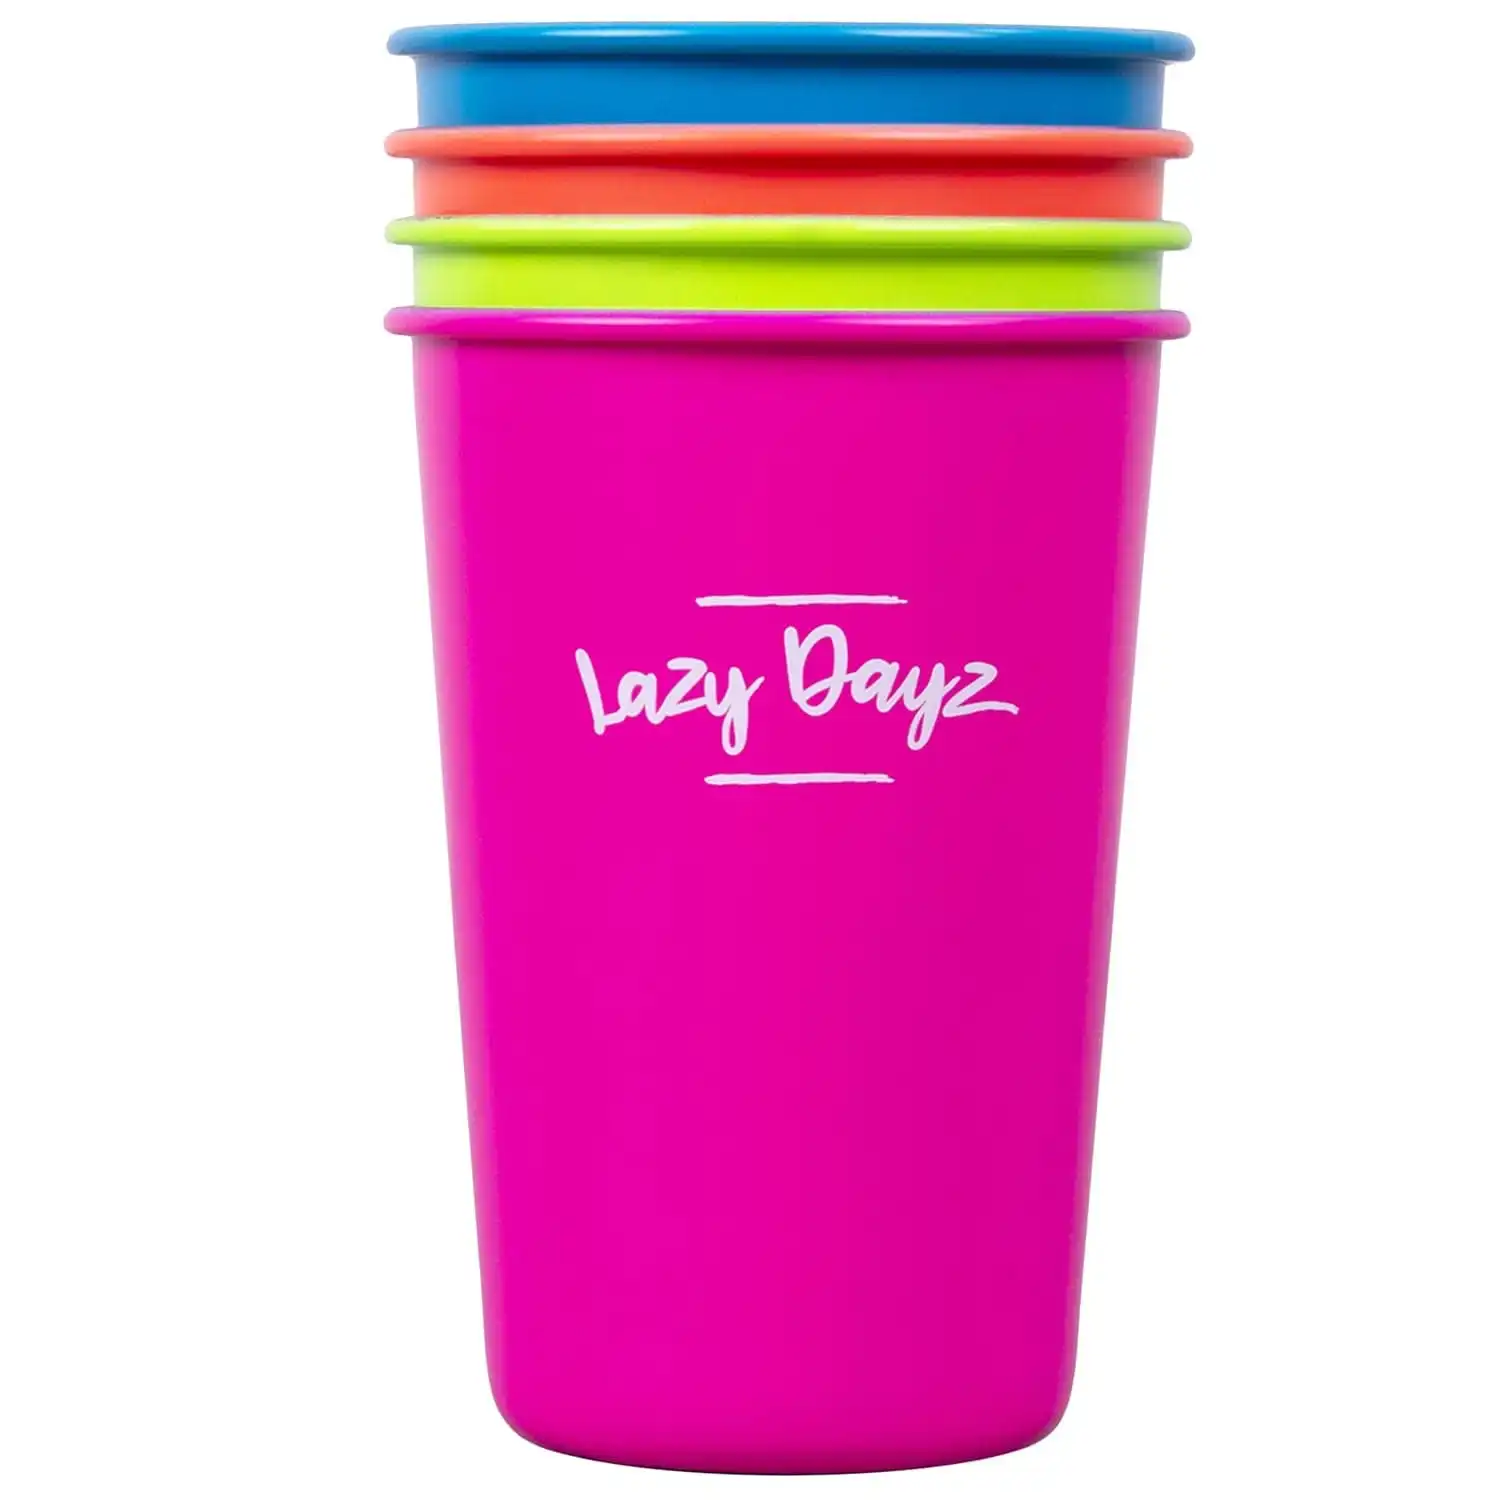 Lazy Dayz Picnic Cup 350ml 4 Pack